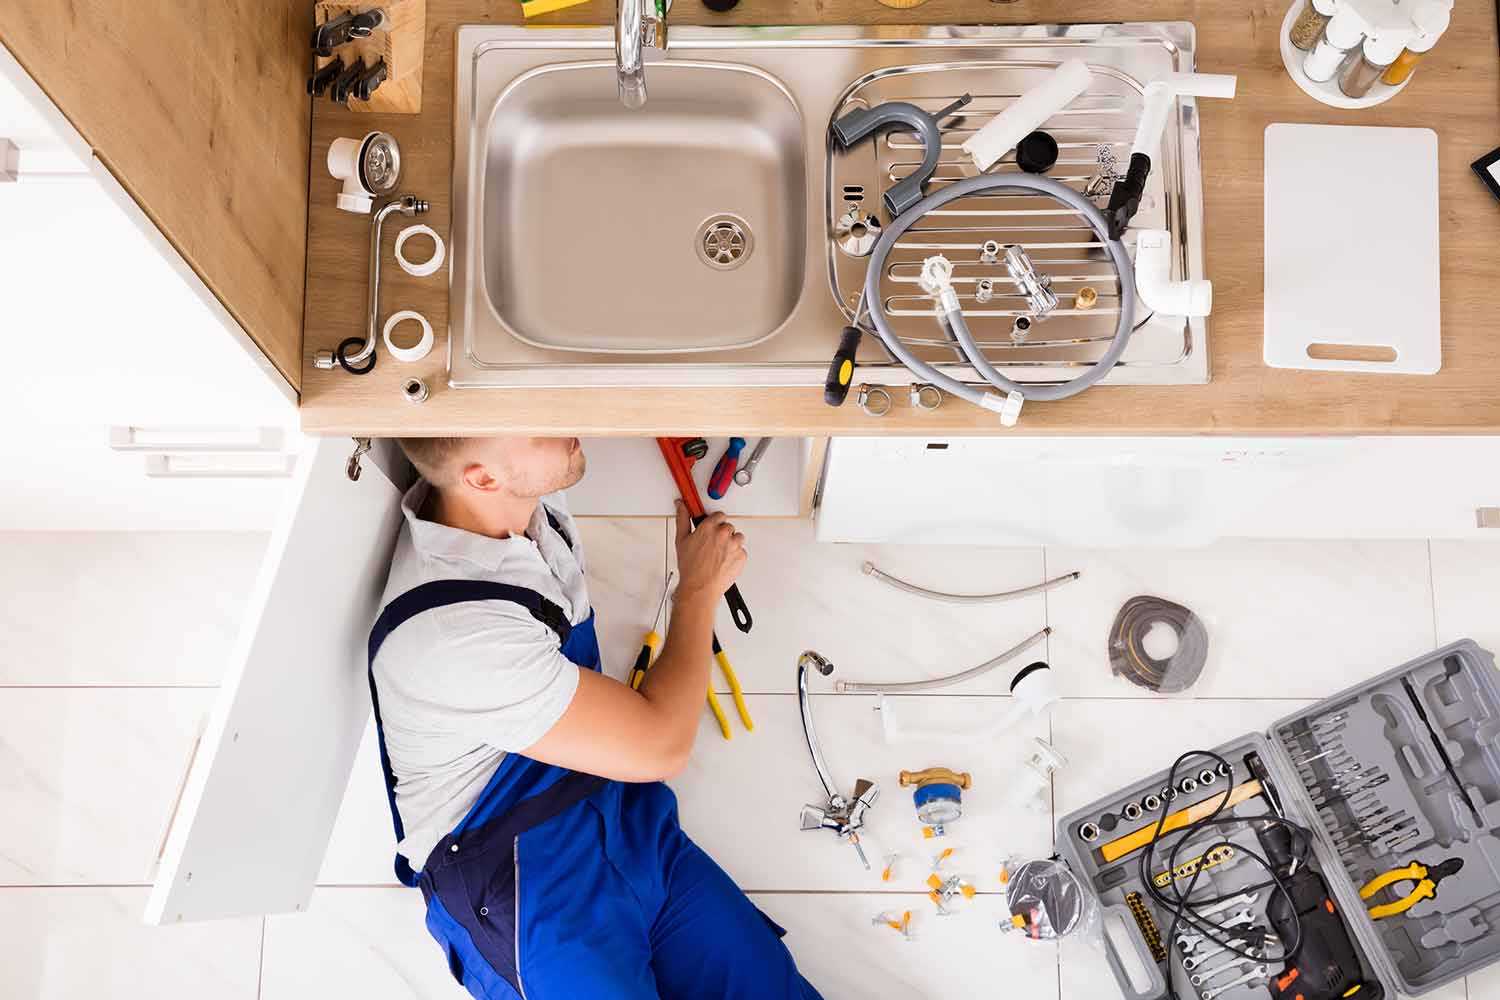 Plumber Working underneath Kitchen Sink with Tools Spread across The Floor